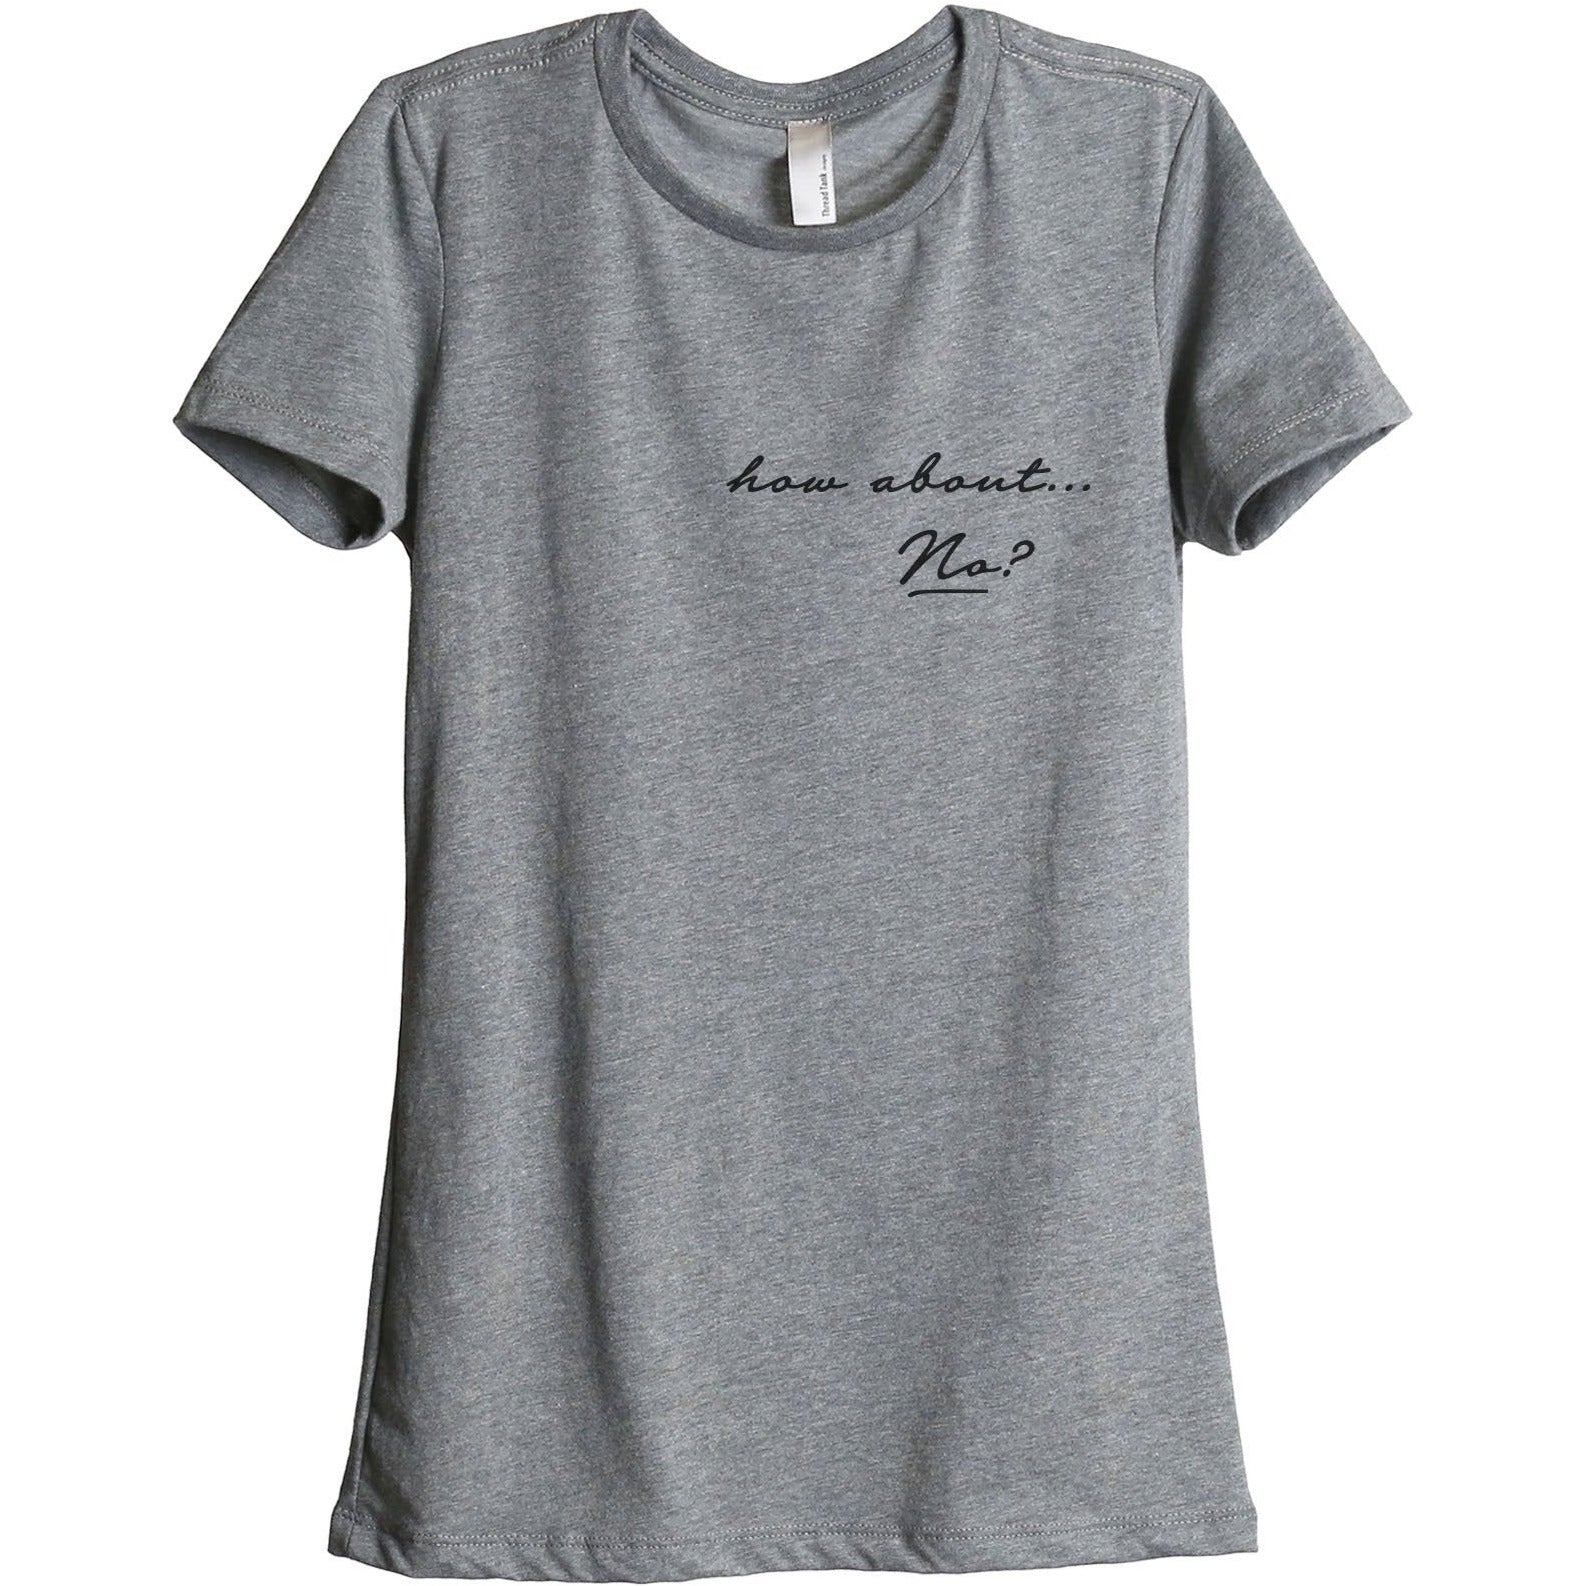 How About No Women's Relaxed Crewneck T-Shirt Top Tee Heather Grey